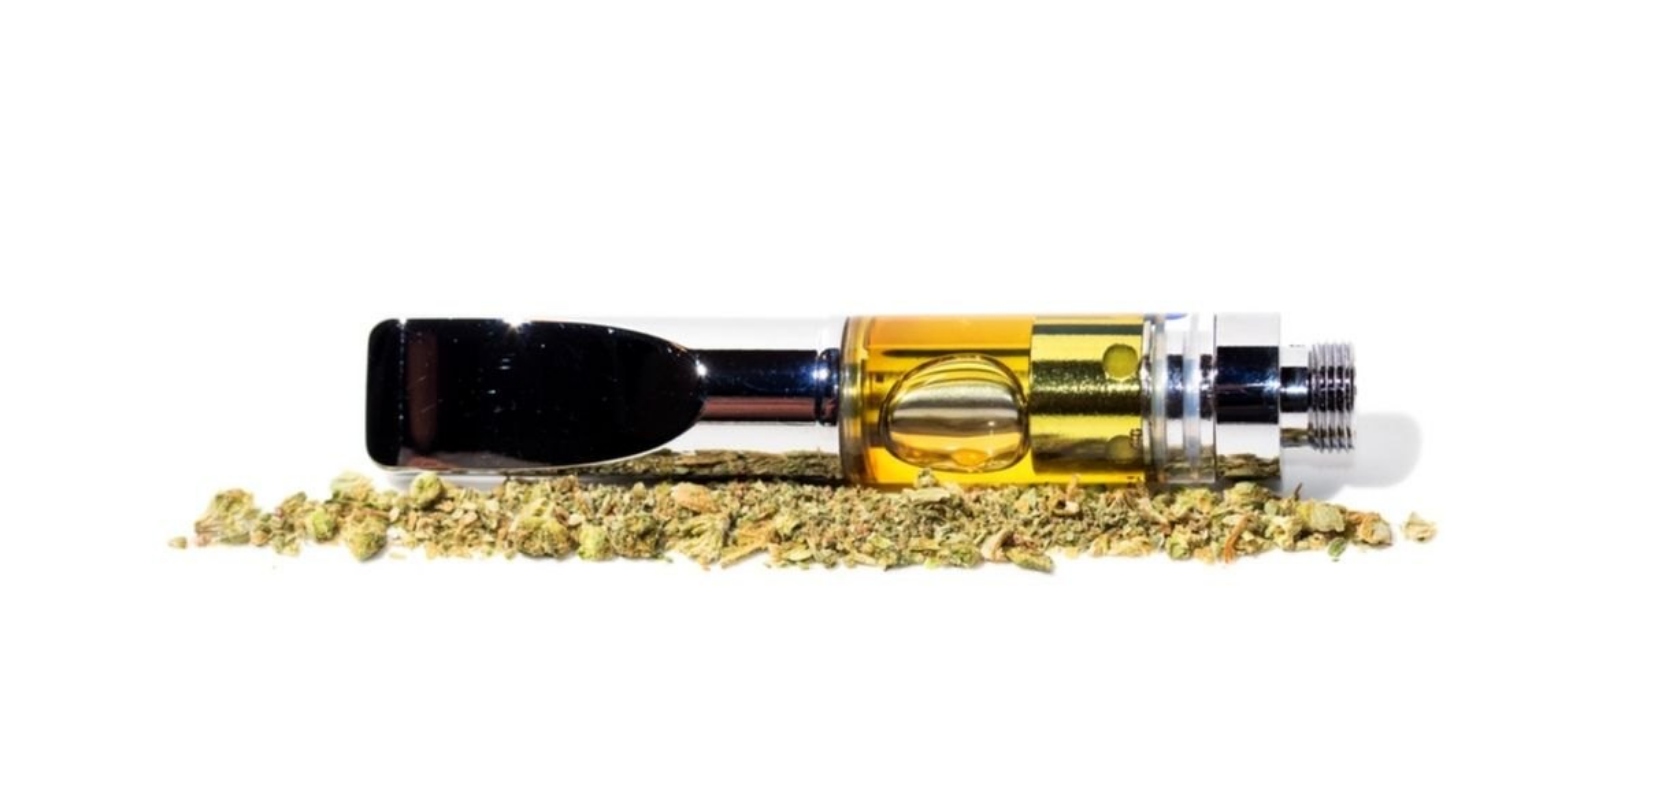 Do dab pens smell like weed? Well, yes. Keep in mind that you are heating extremely potent cannabis products.